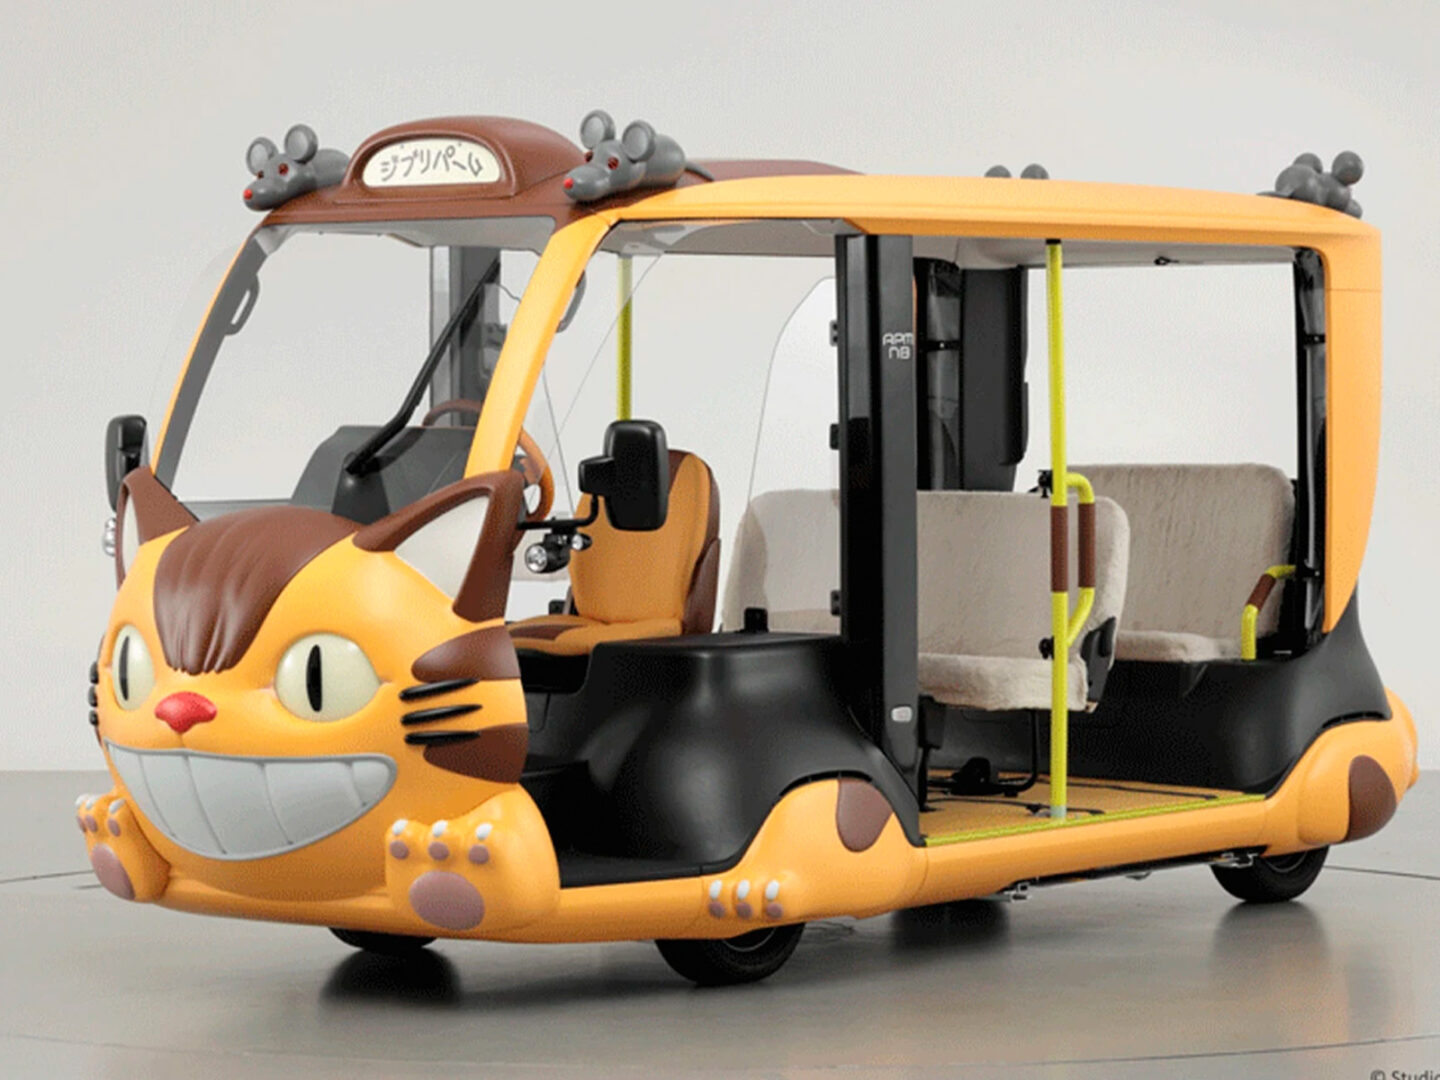 Studio Ghibli’s Catbus comes to life as a fully functional electric vehicle